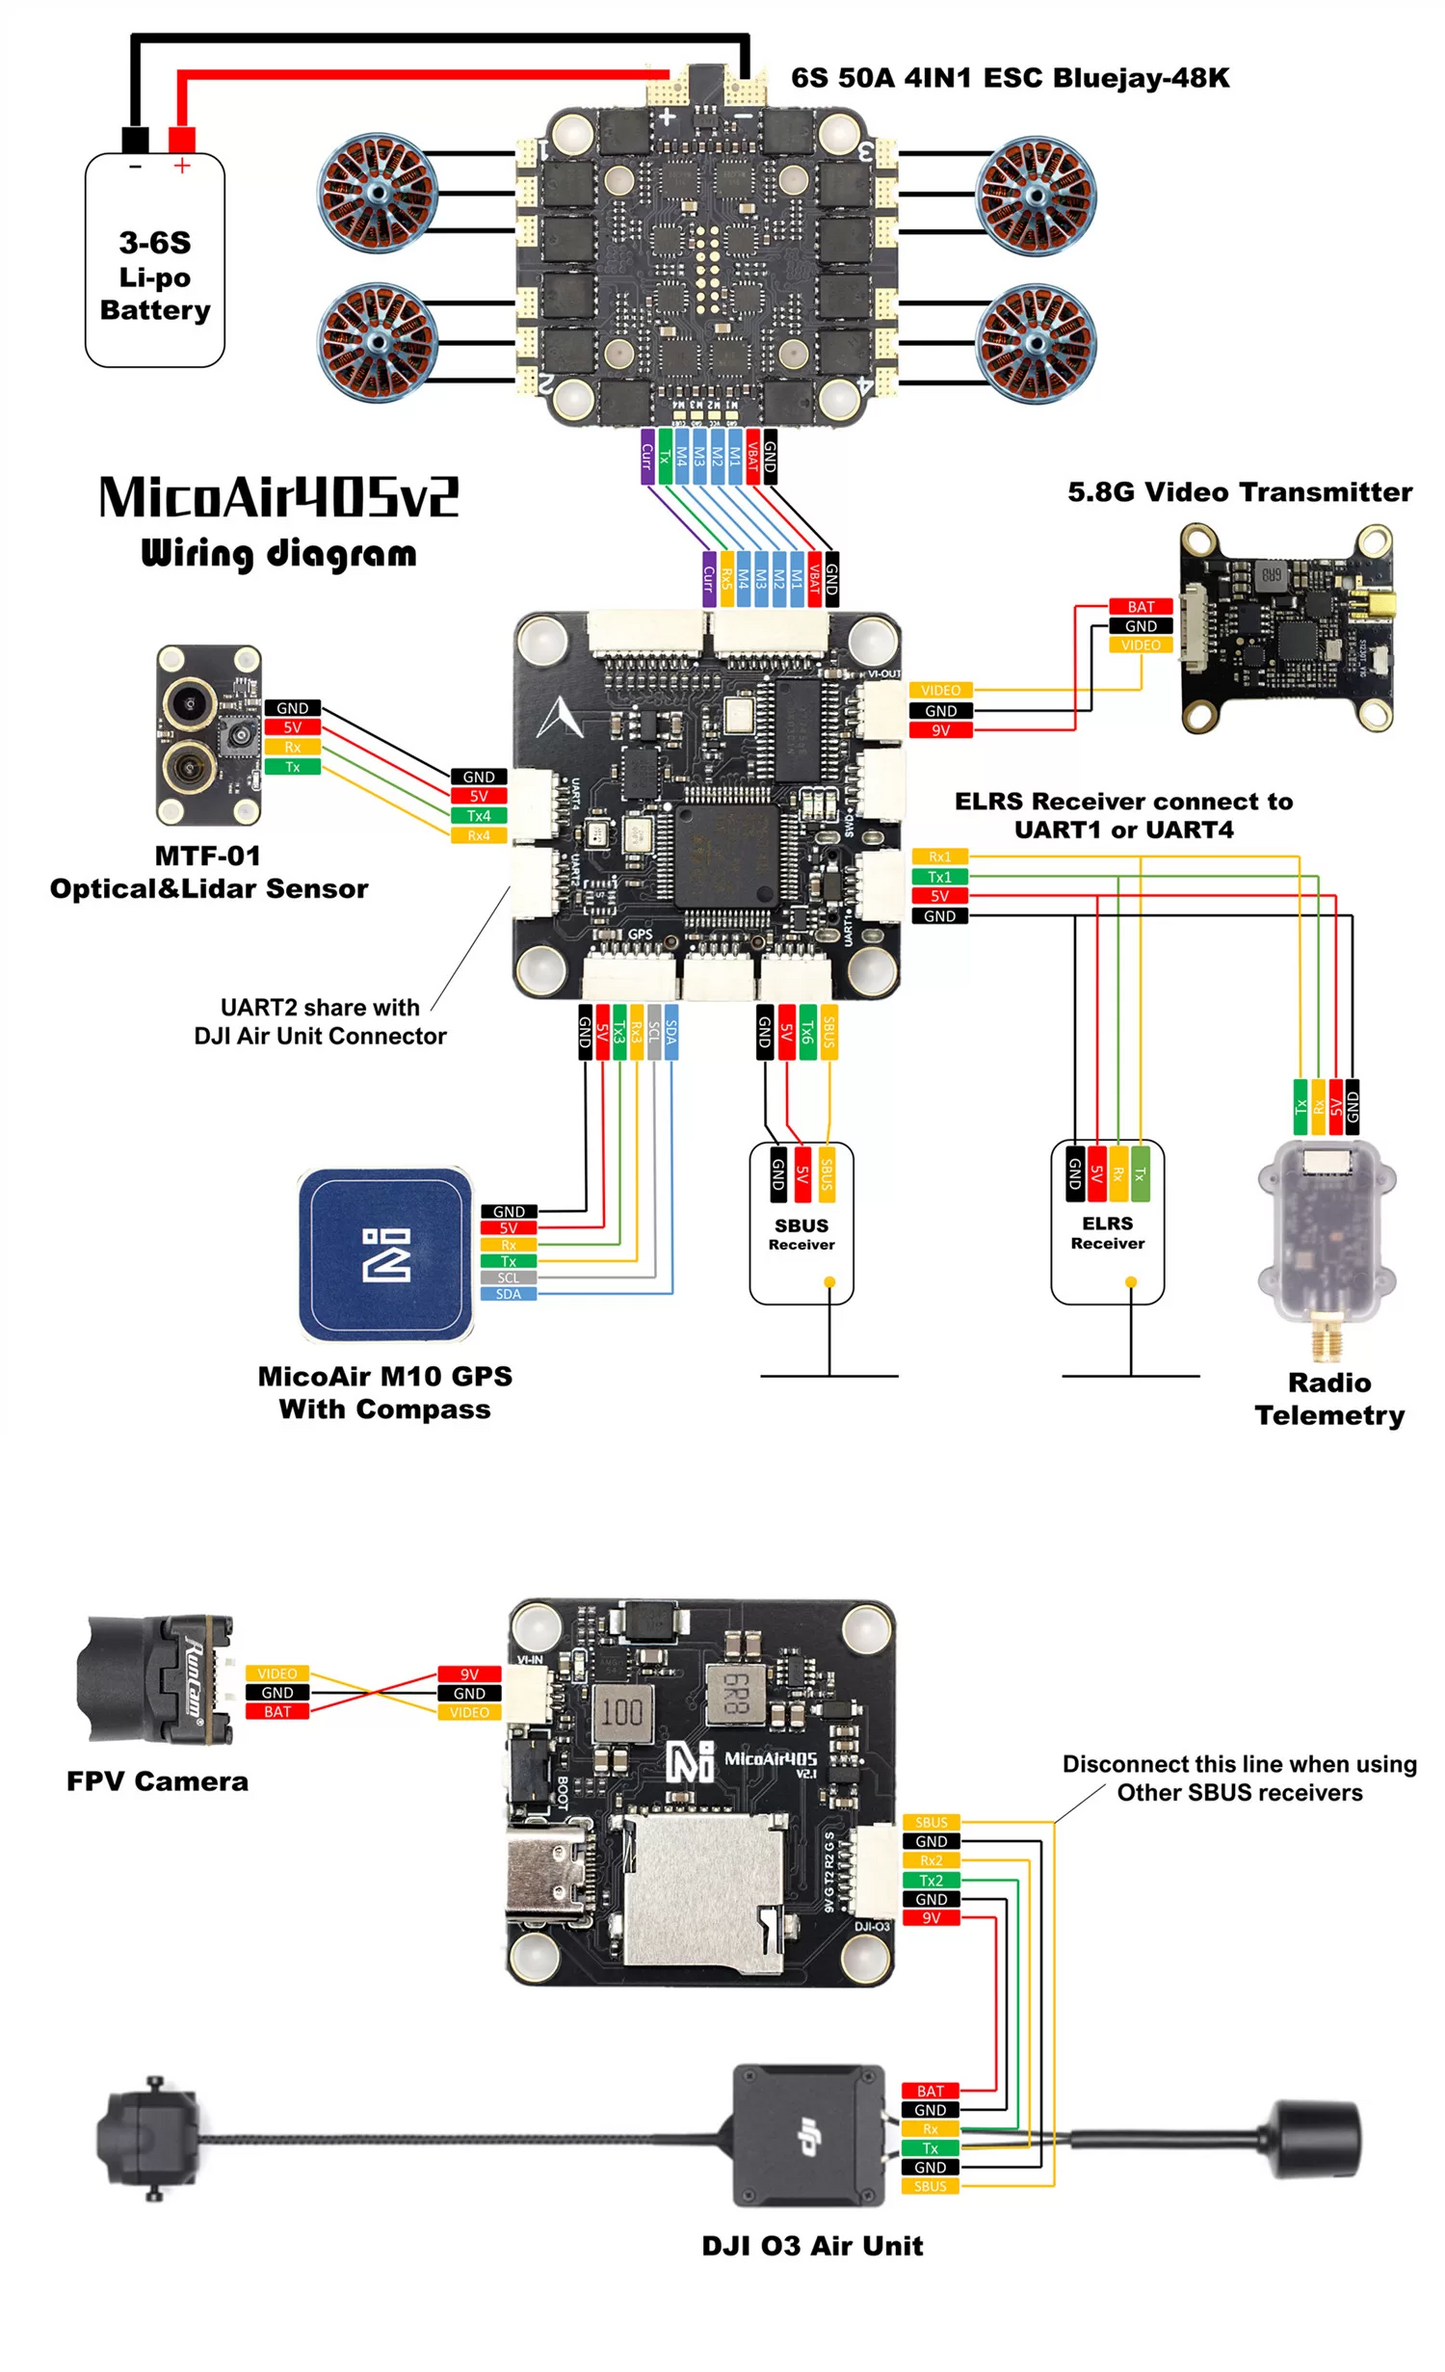 MicoAir F405 V2 Flight Controller Stack with 4in1 50A Bluejay 48K ESC FC&ESC Support Ardupilot/INAV for DJI O3 Air Unit FPV